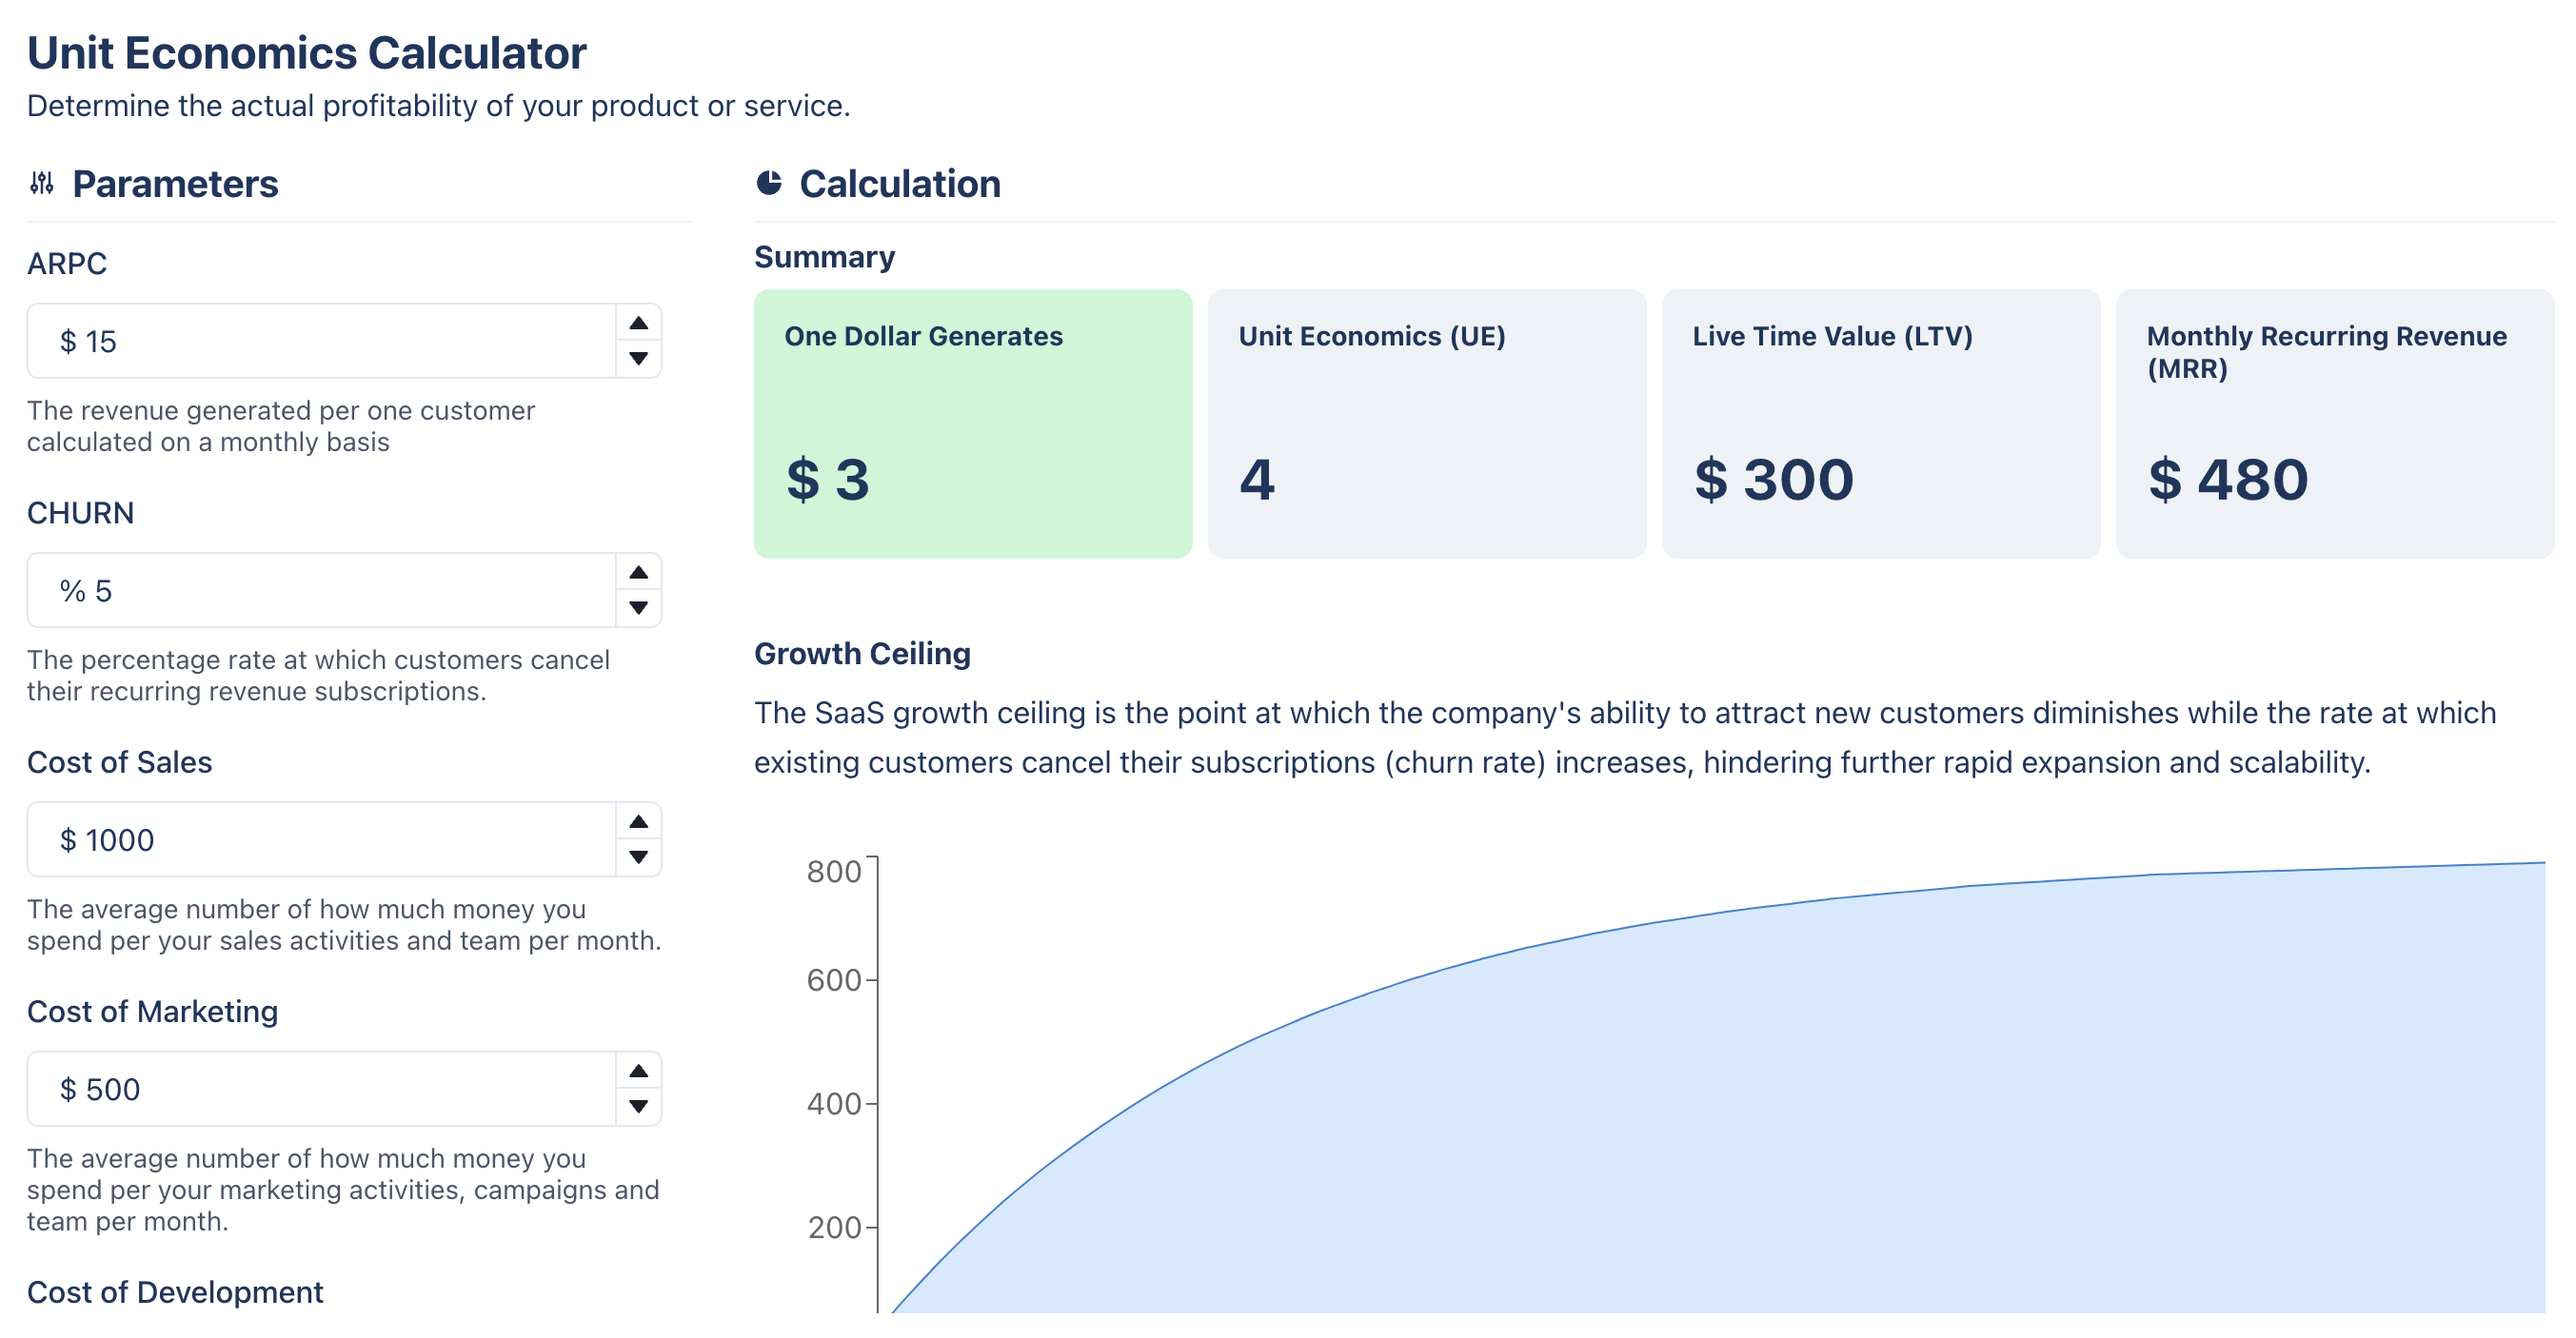 saas pricing calculator for calculating unit economics, business valuation, revenue, costs, and numbers such as MRR, LTV, CAC or Growth Ceiling.